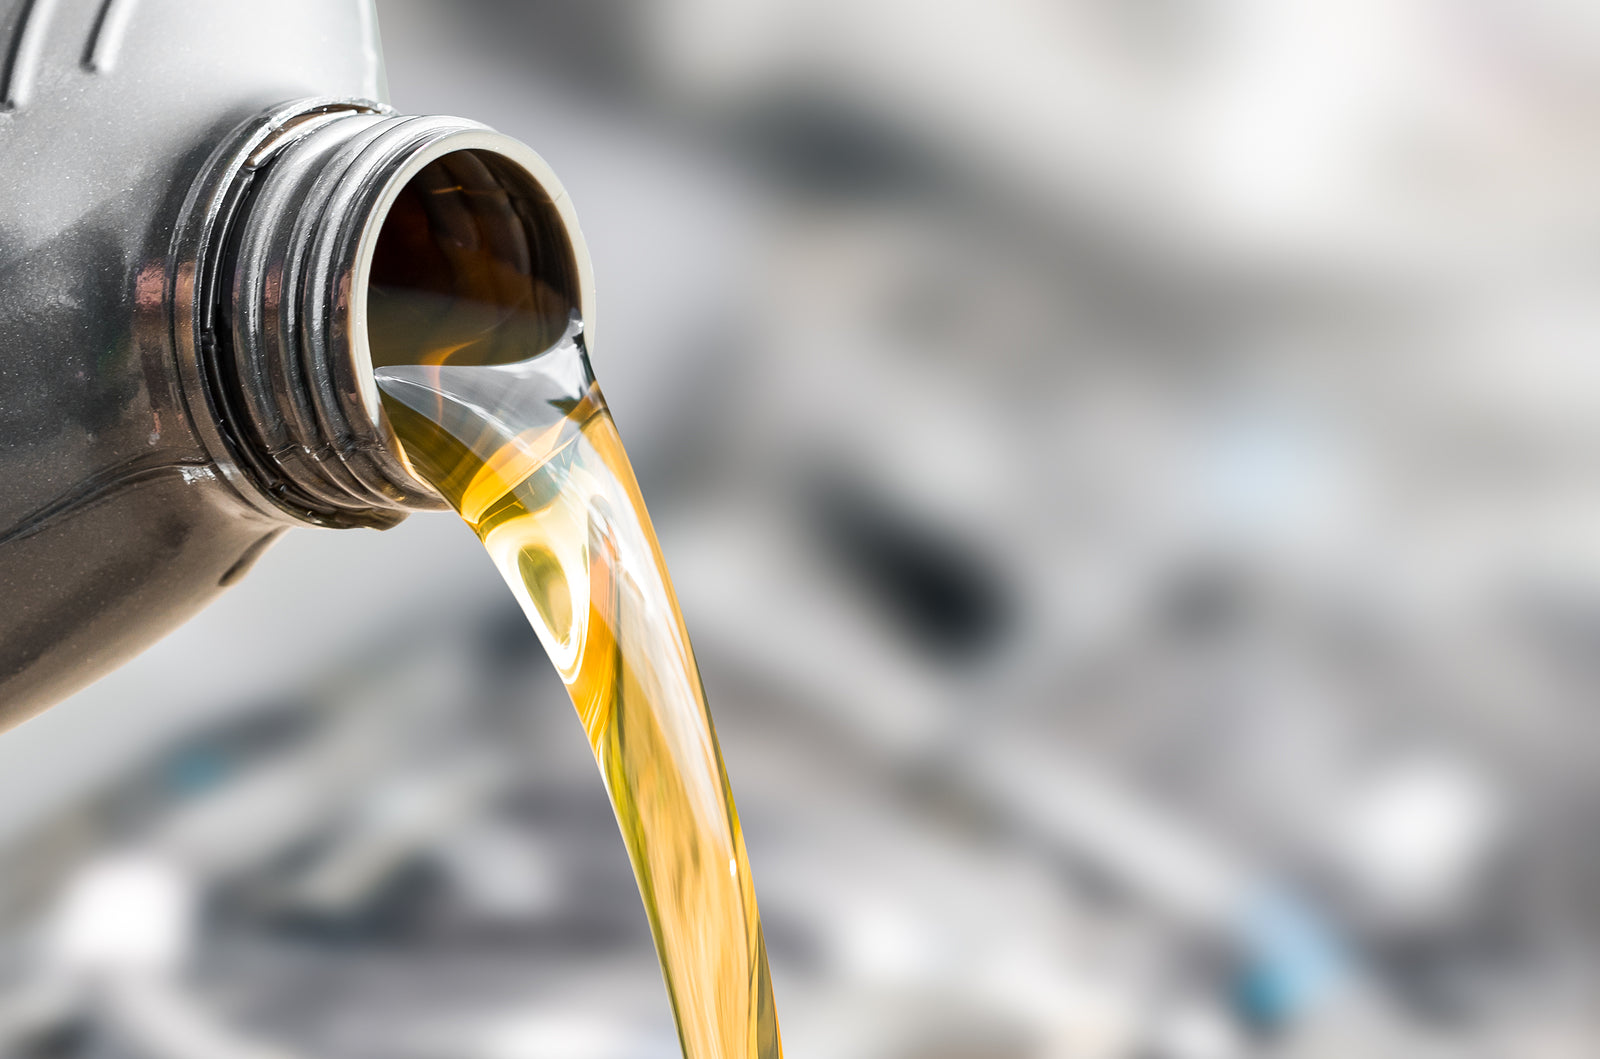 Why do you need to lubricate your car?